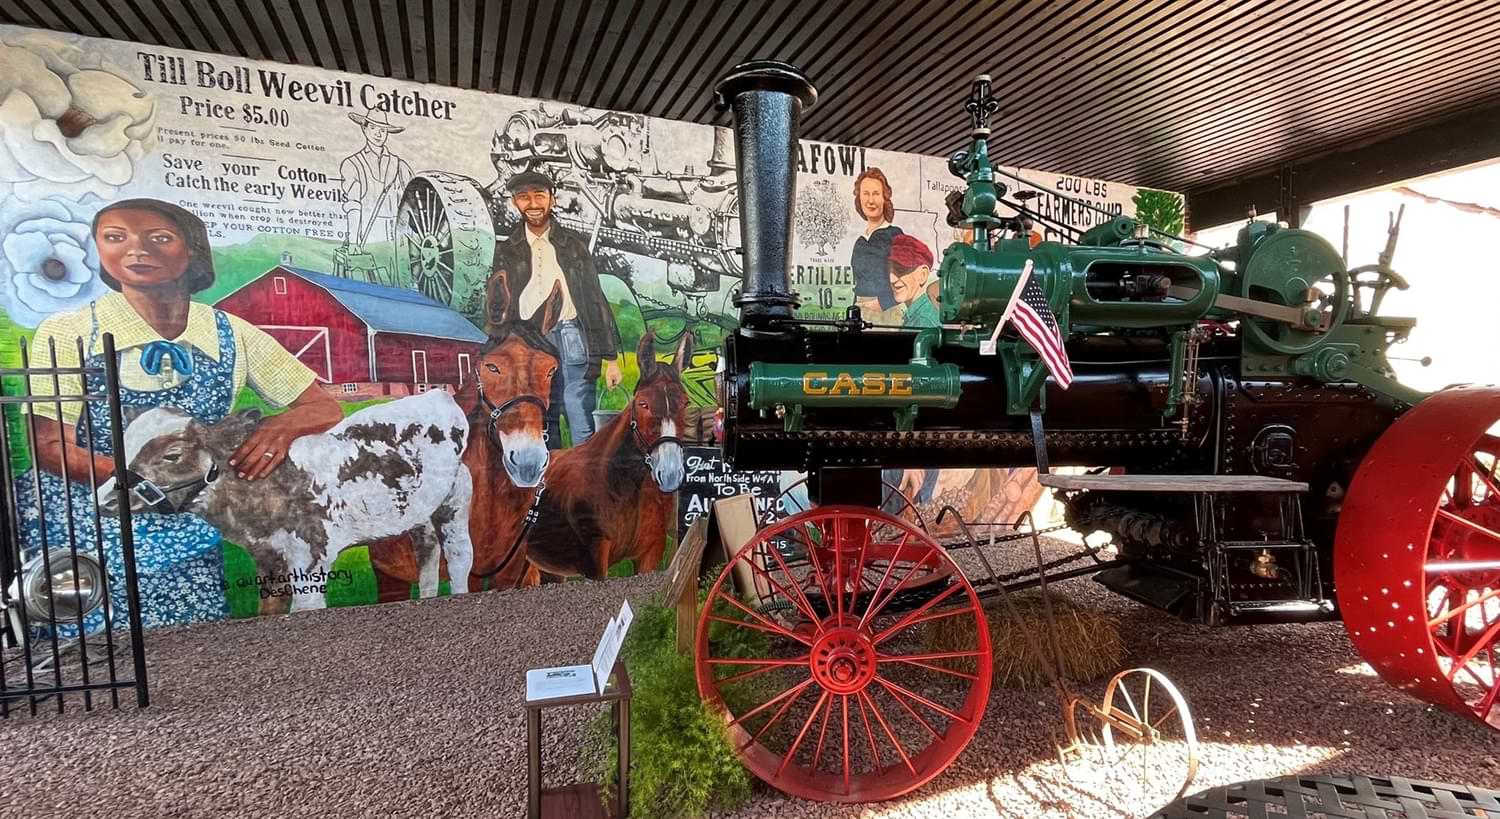 35x13 feet mural, celebrates local agricultural history and features imagery of historic equipment, advertising, local agricultural pioneers, the east Alabama landscape, farmers and farm culture. 